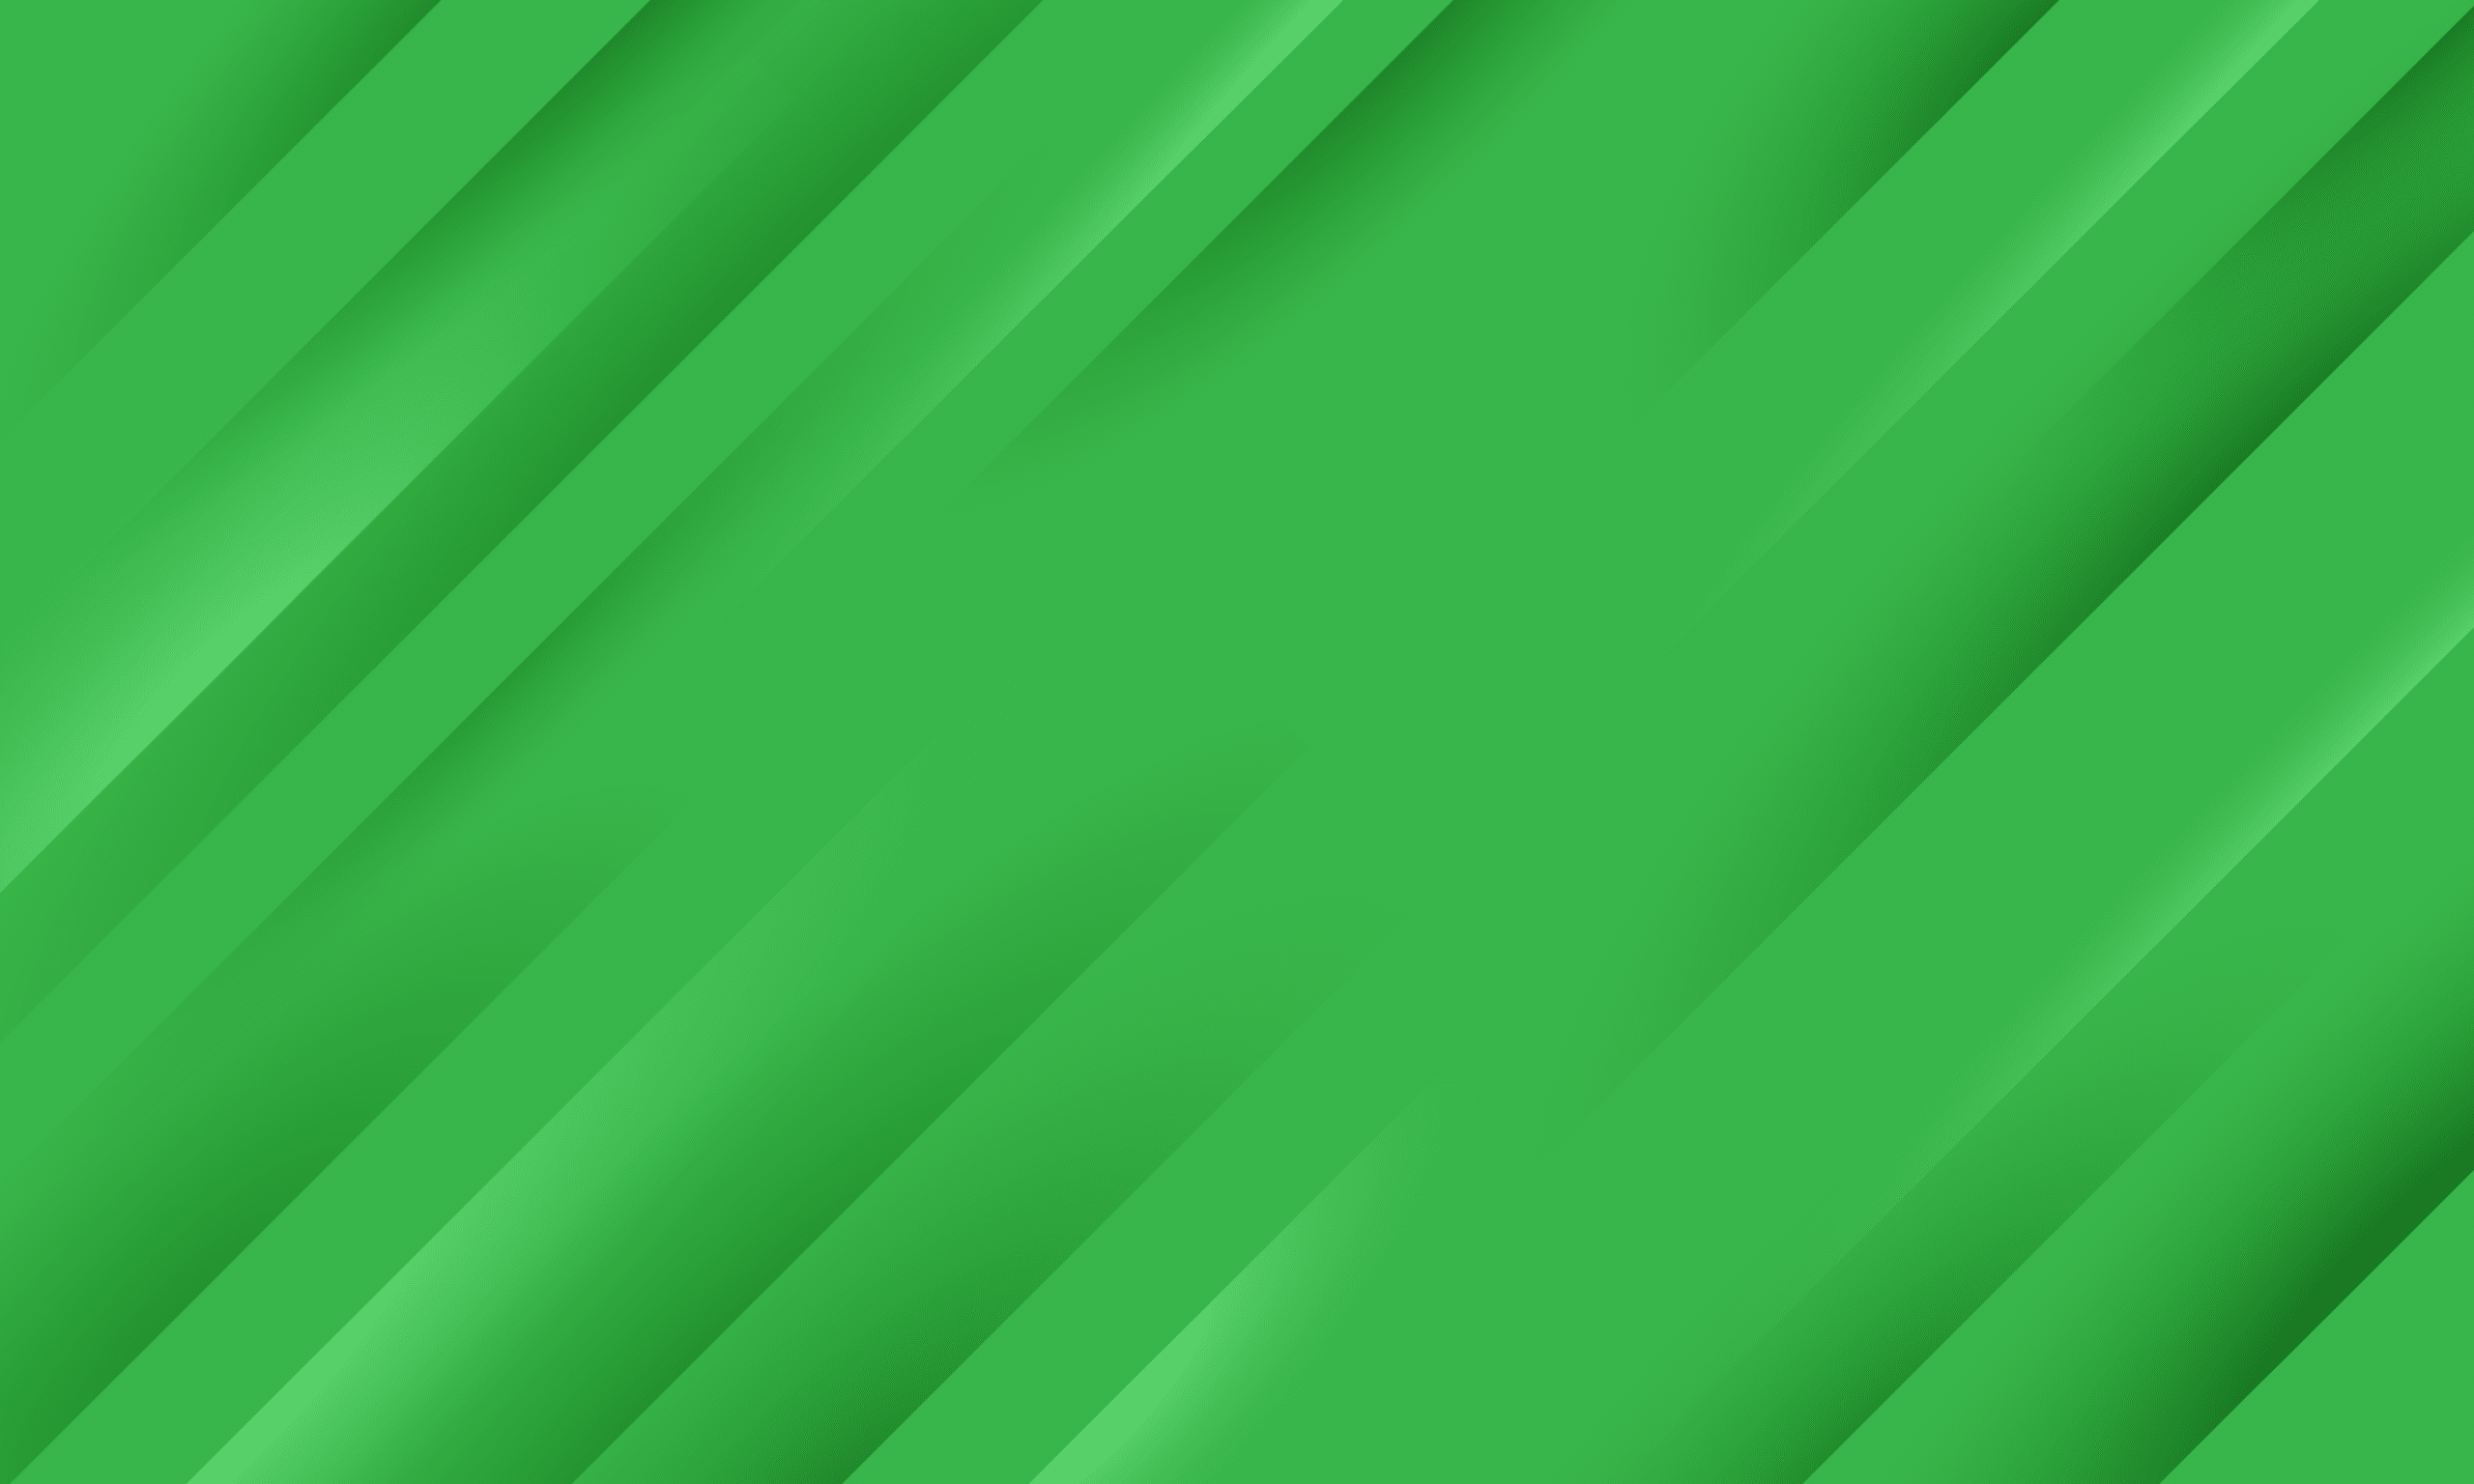 Abstract green diagonal stripes background: Why it's Important.